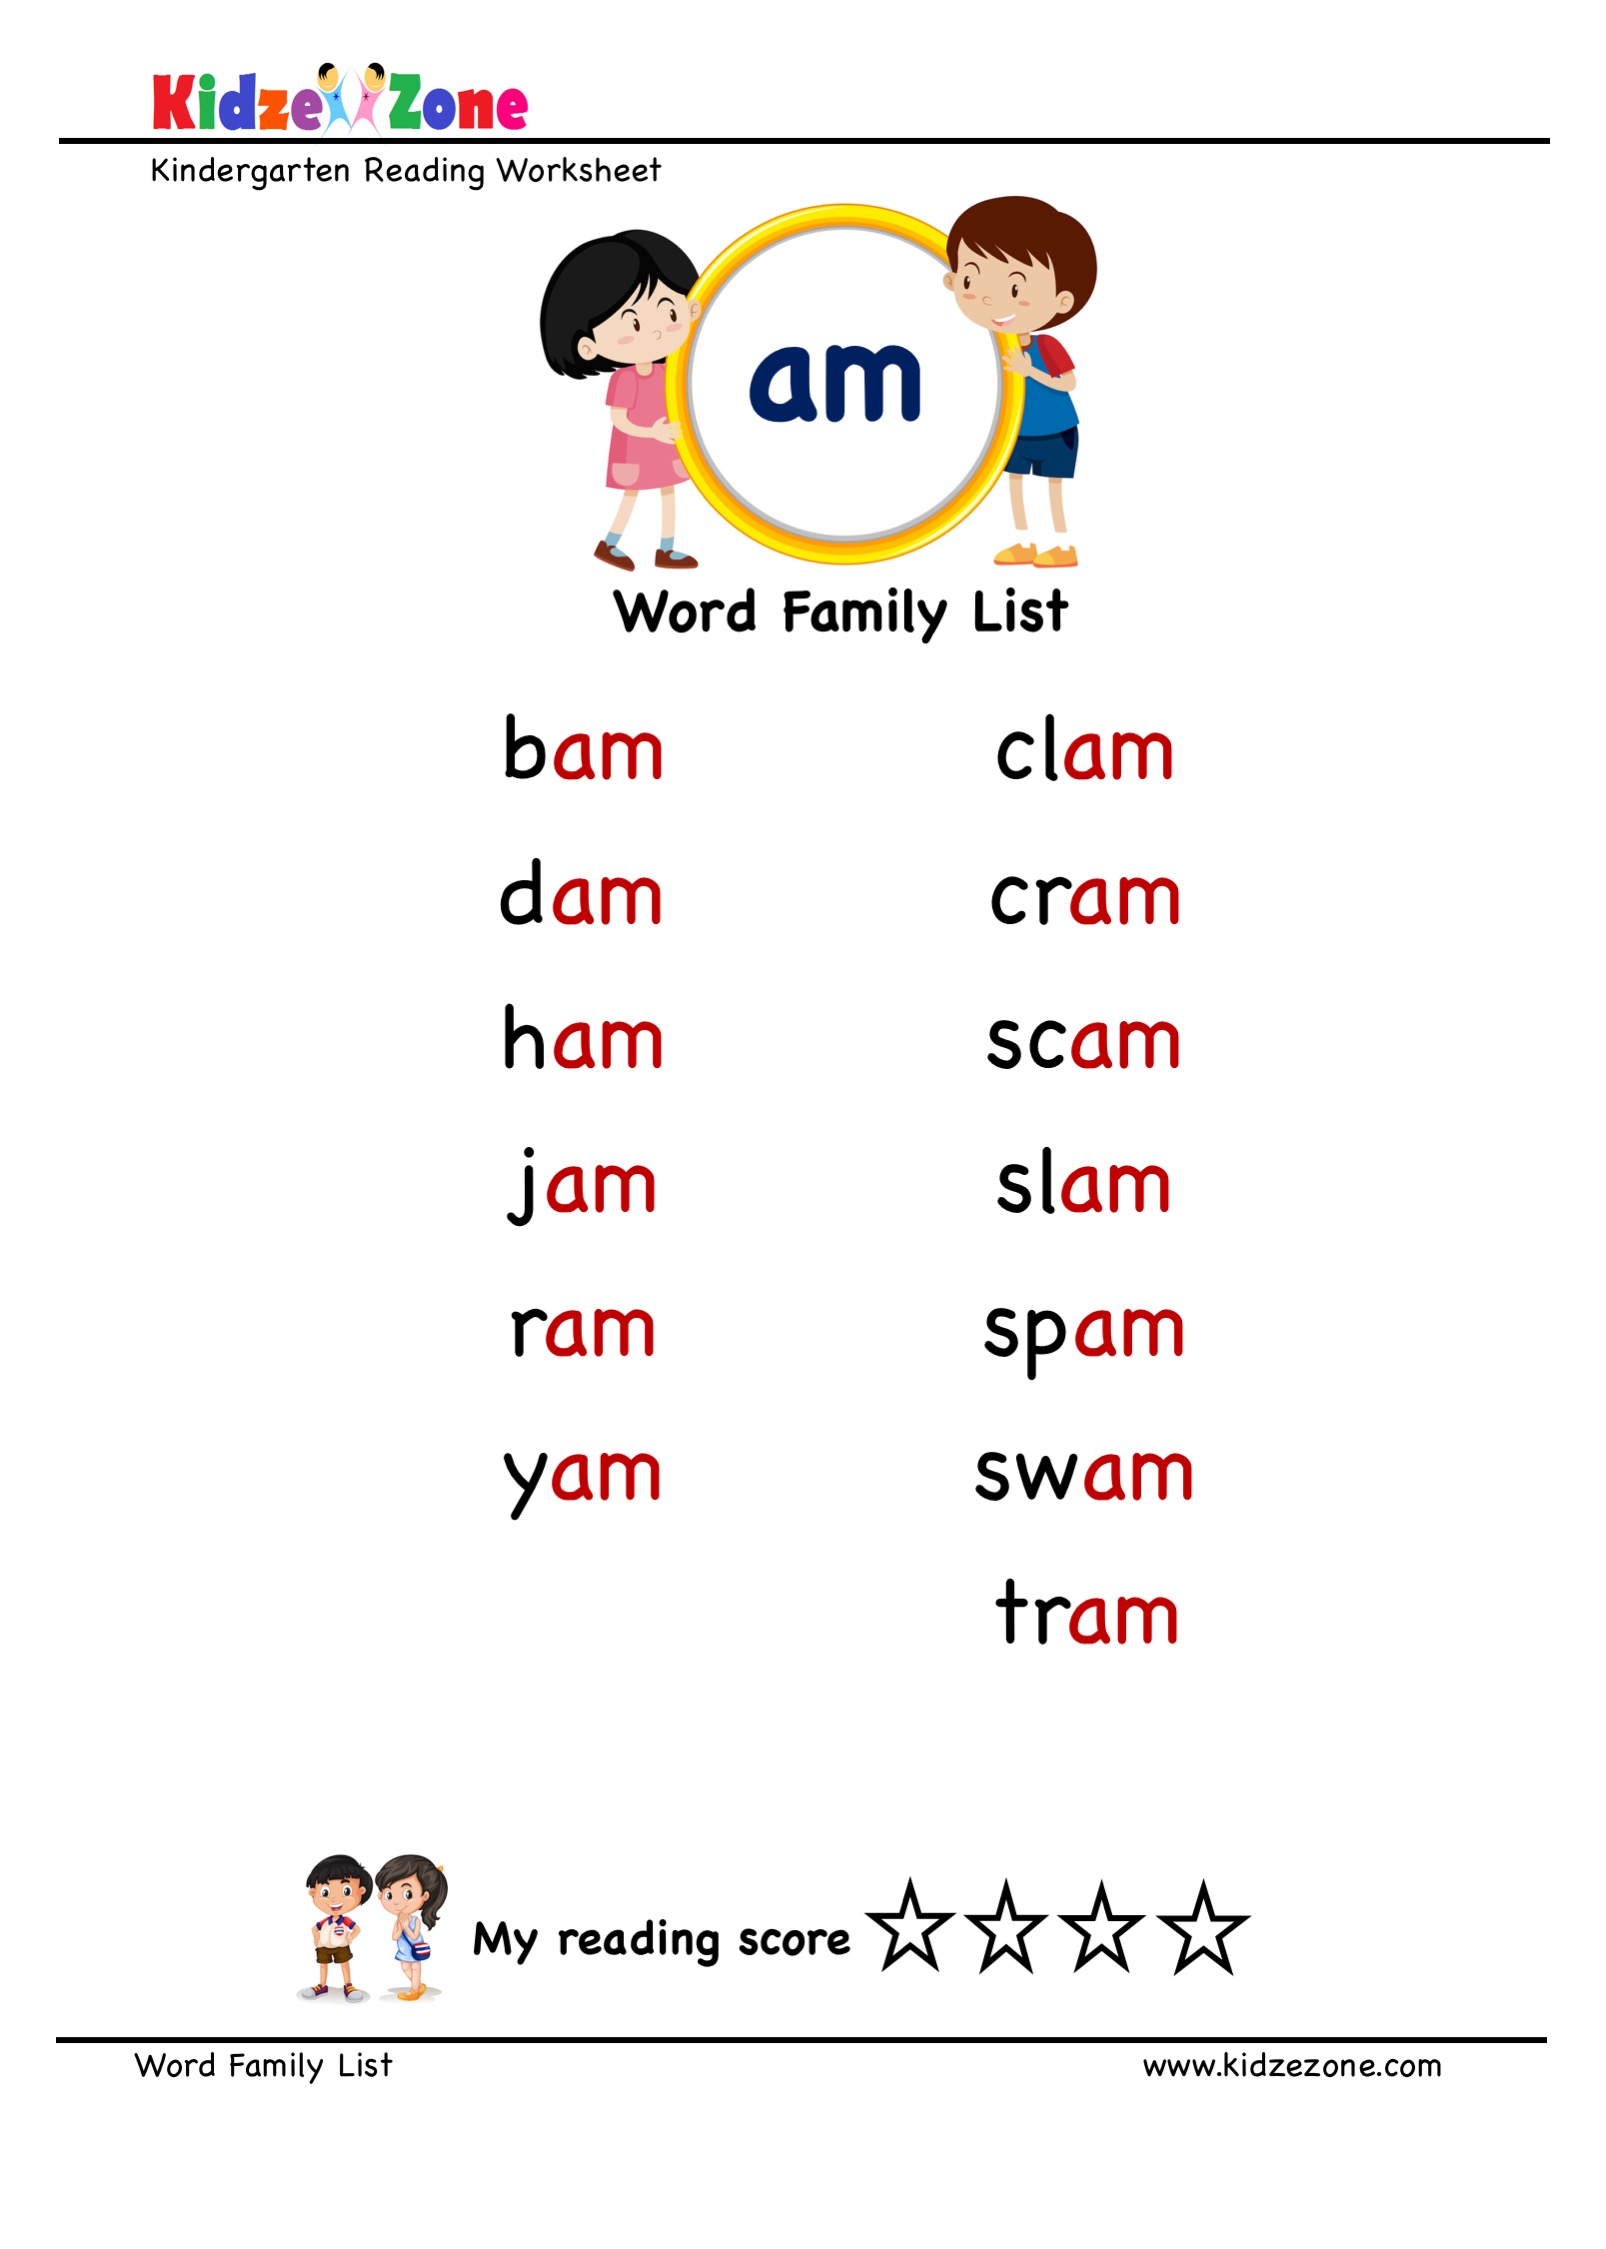 explore-and-learn-words-from-am-word-family-with-word-list-worksheet